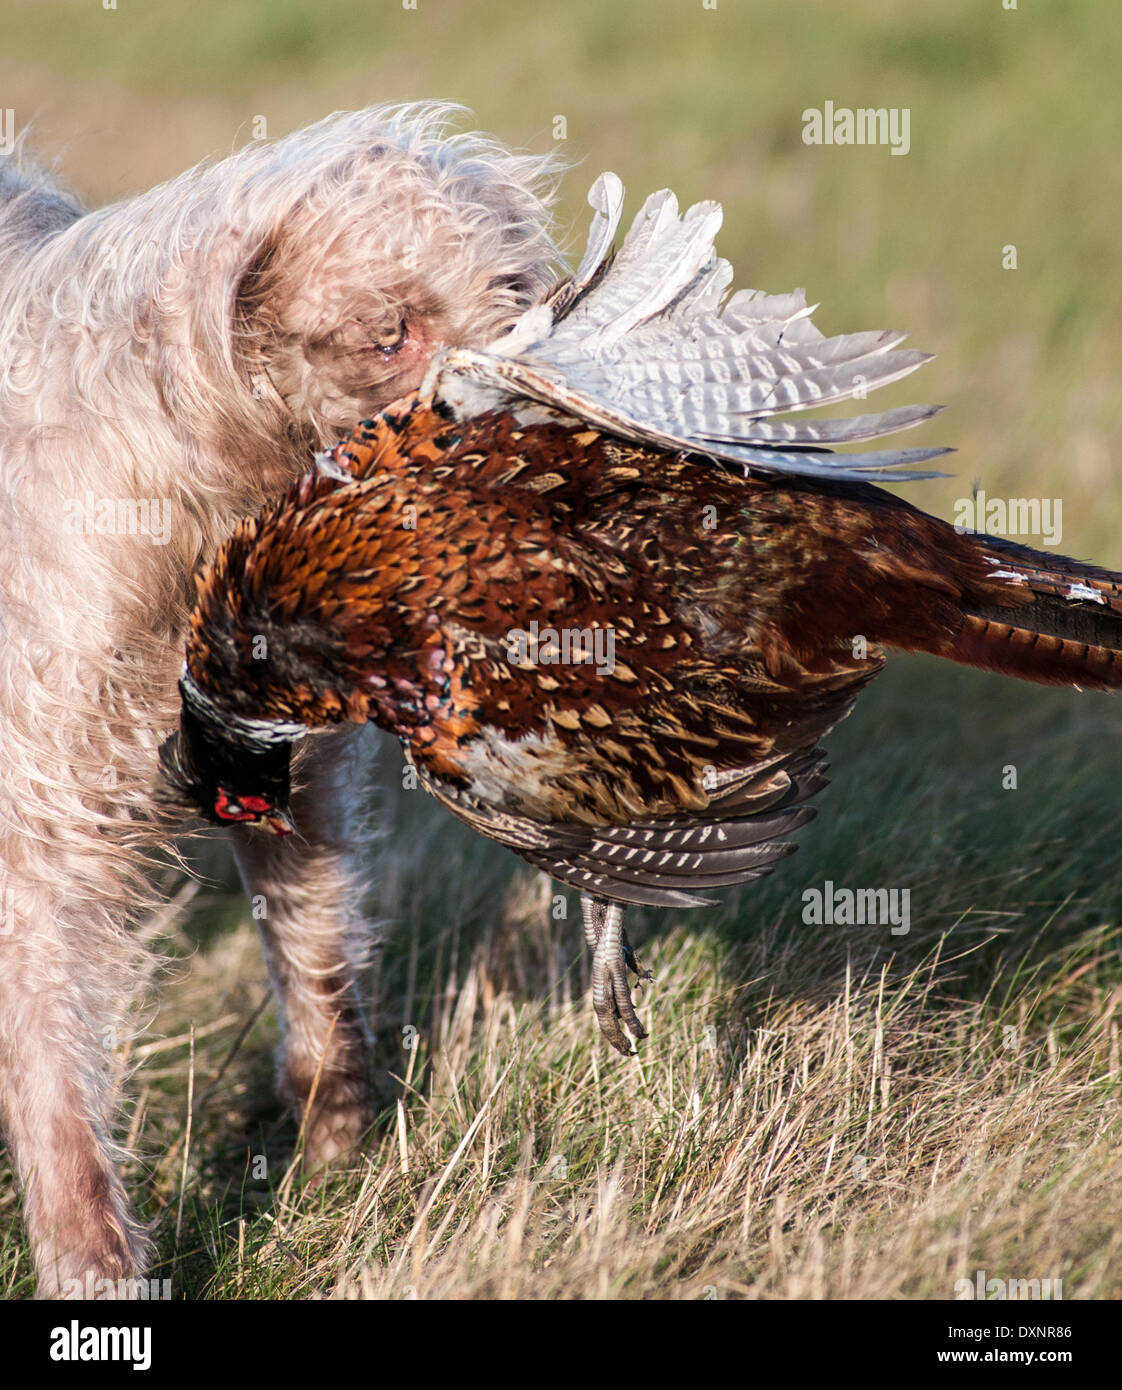 A Slovak Wirehaired Pointer, or Slovakian Rough-haired Pointer dog, with a pheasant Stock Photo